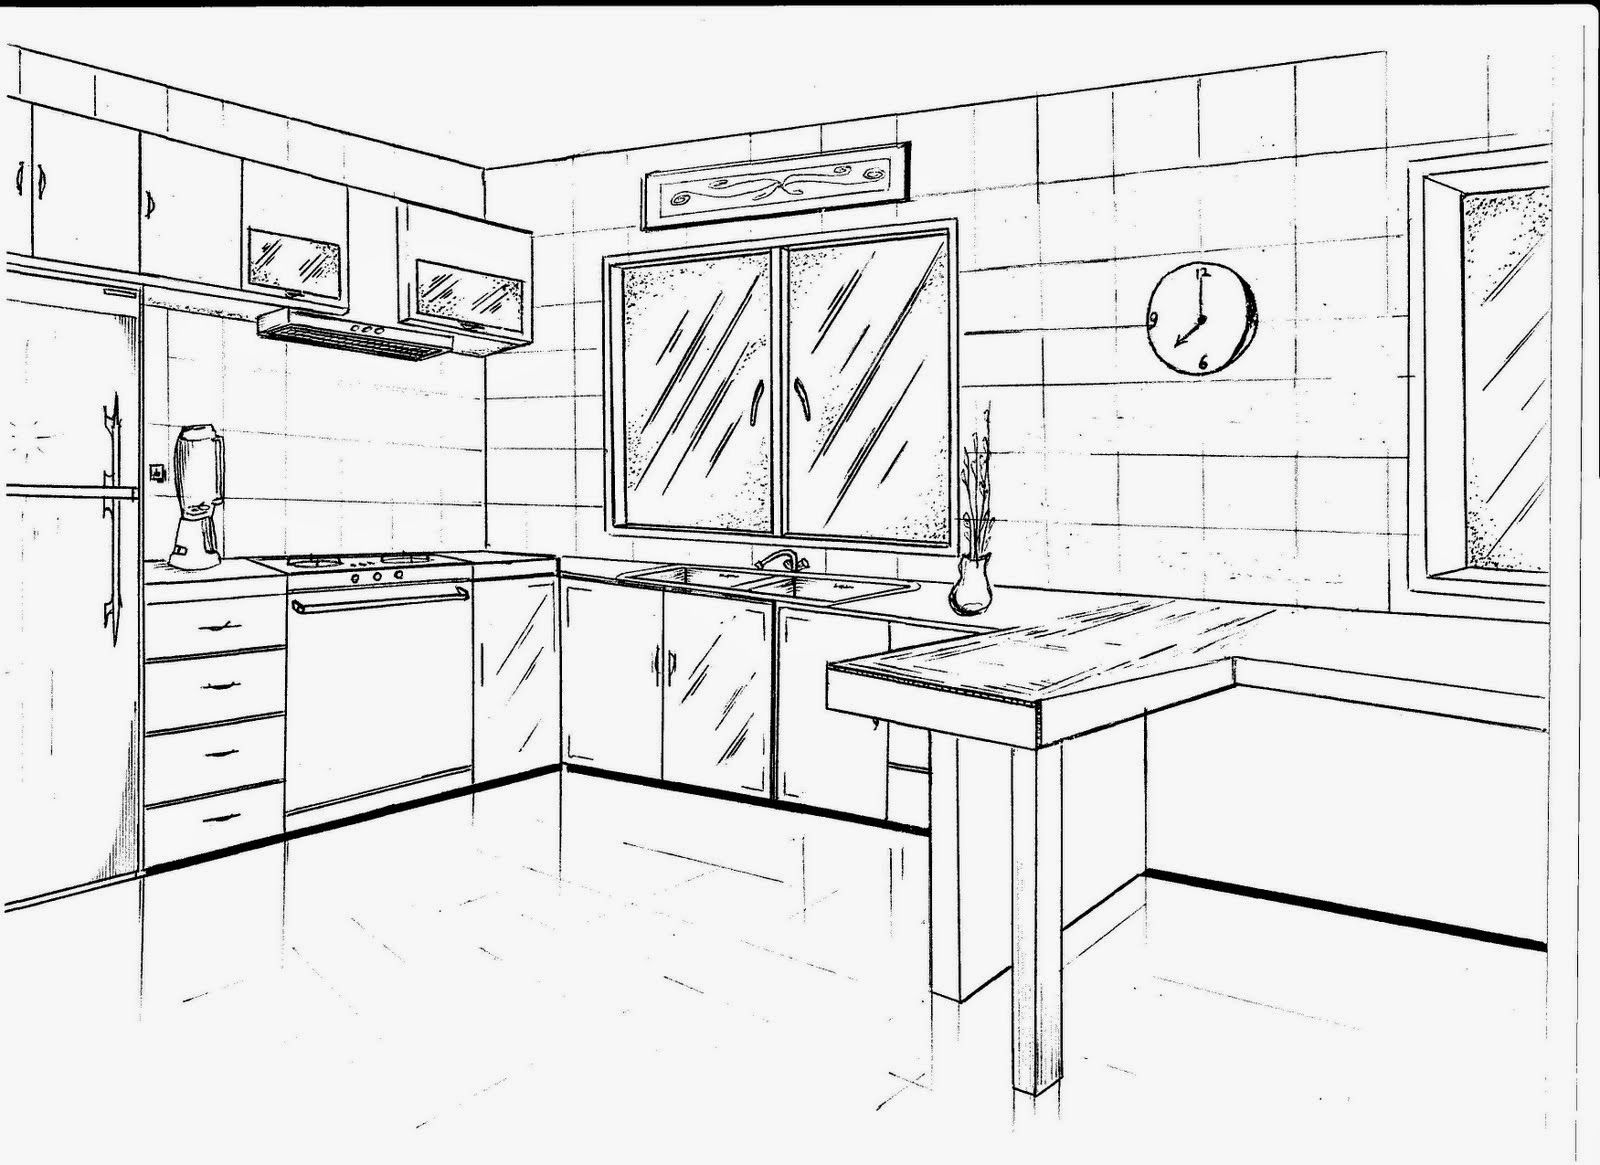  kitchen design drawings